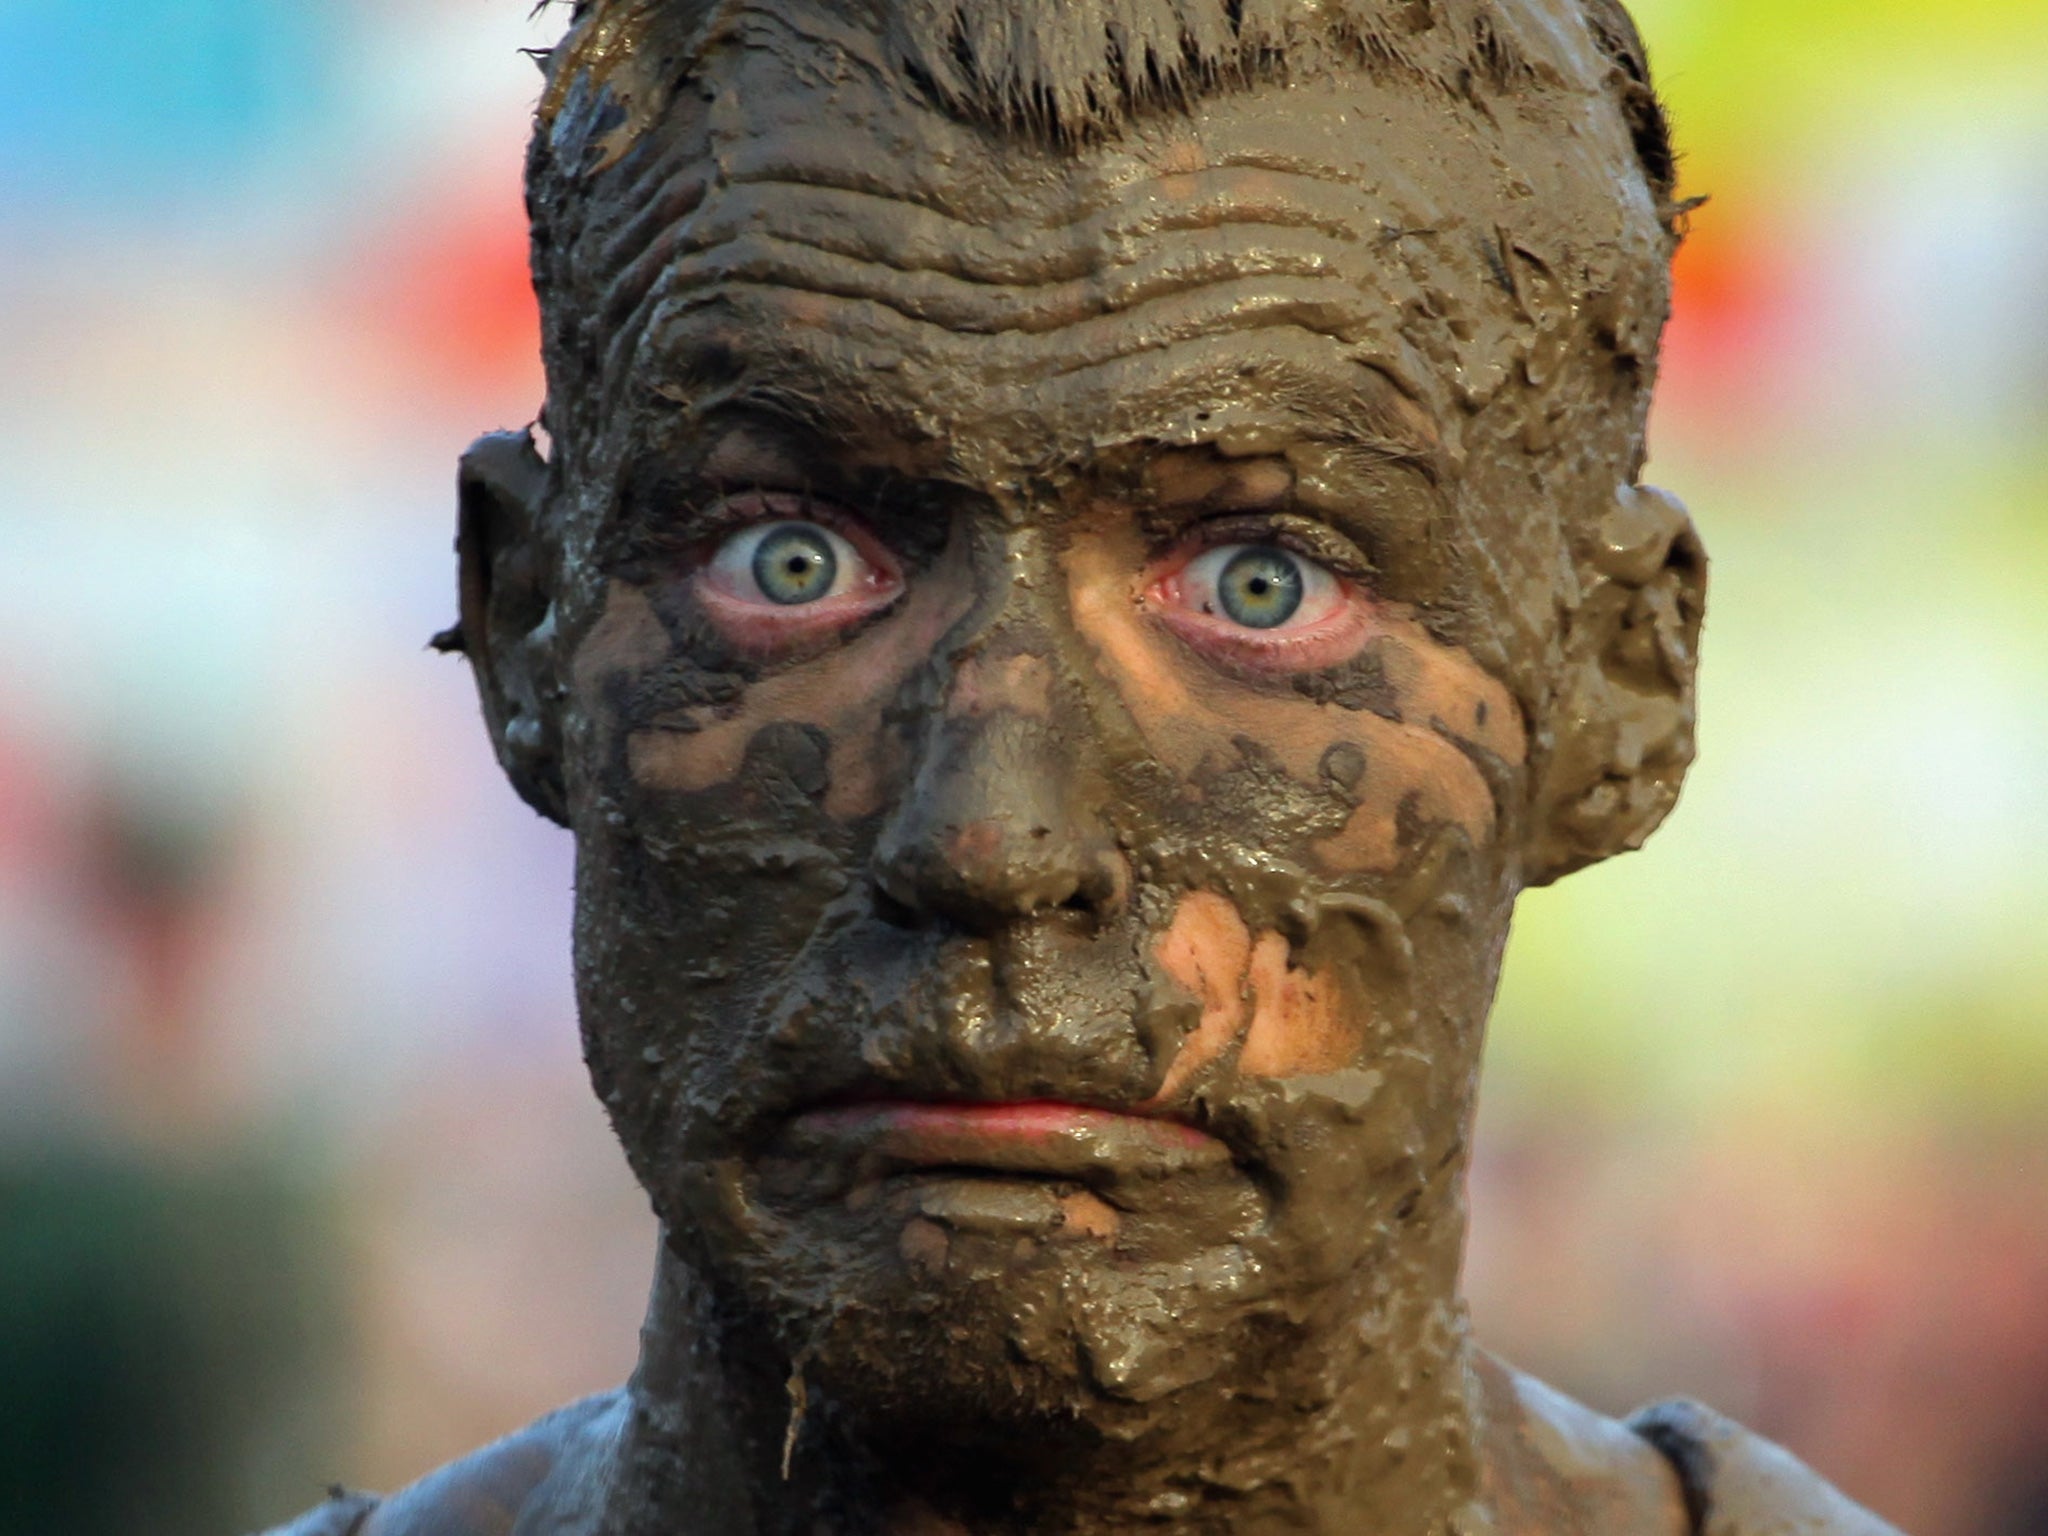 A festival-goer gets covered in mud near the main Pyramid Stage at the Glastonbury Festival on June 26, 2009 in Glastonbury, England